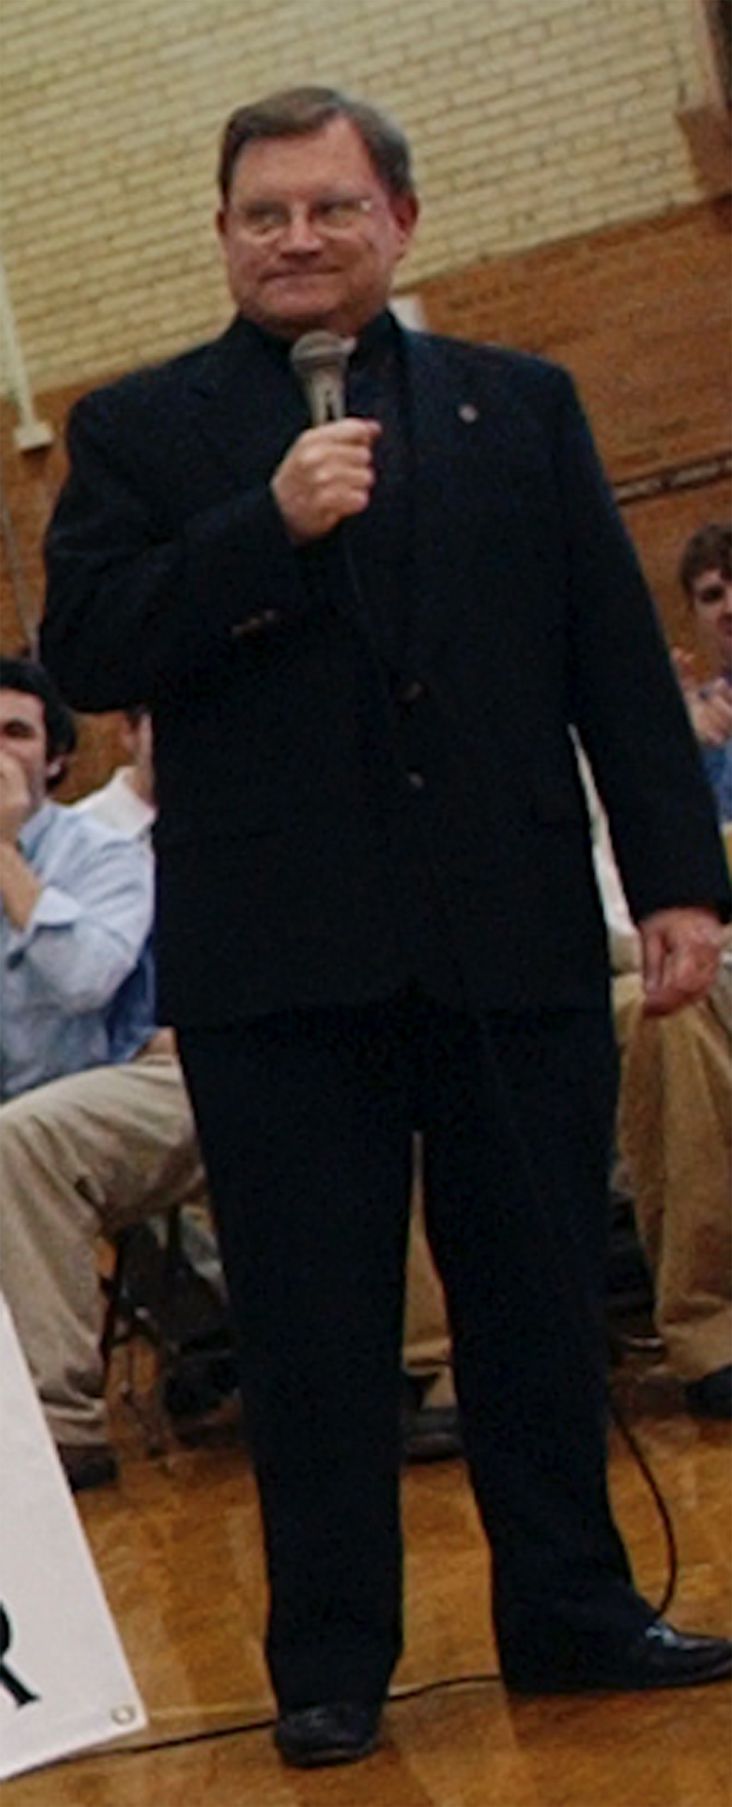 Brother Karl Walczak at Brother Rice High School on the Southwest Side in 2006.